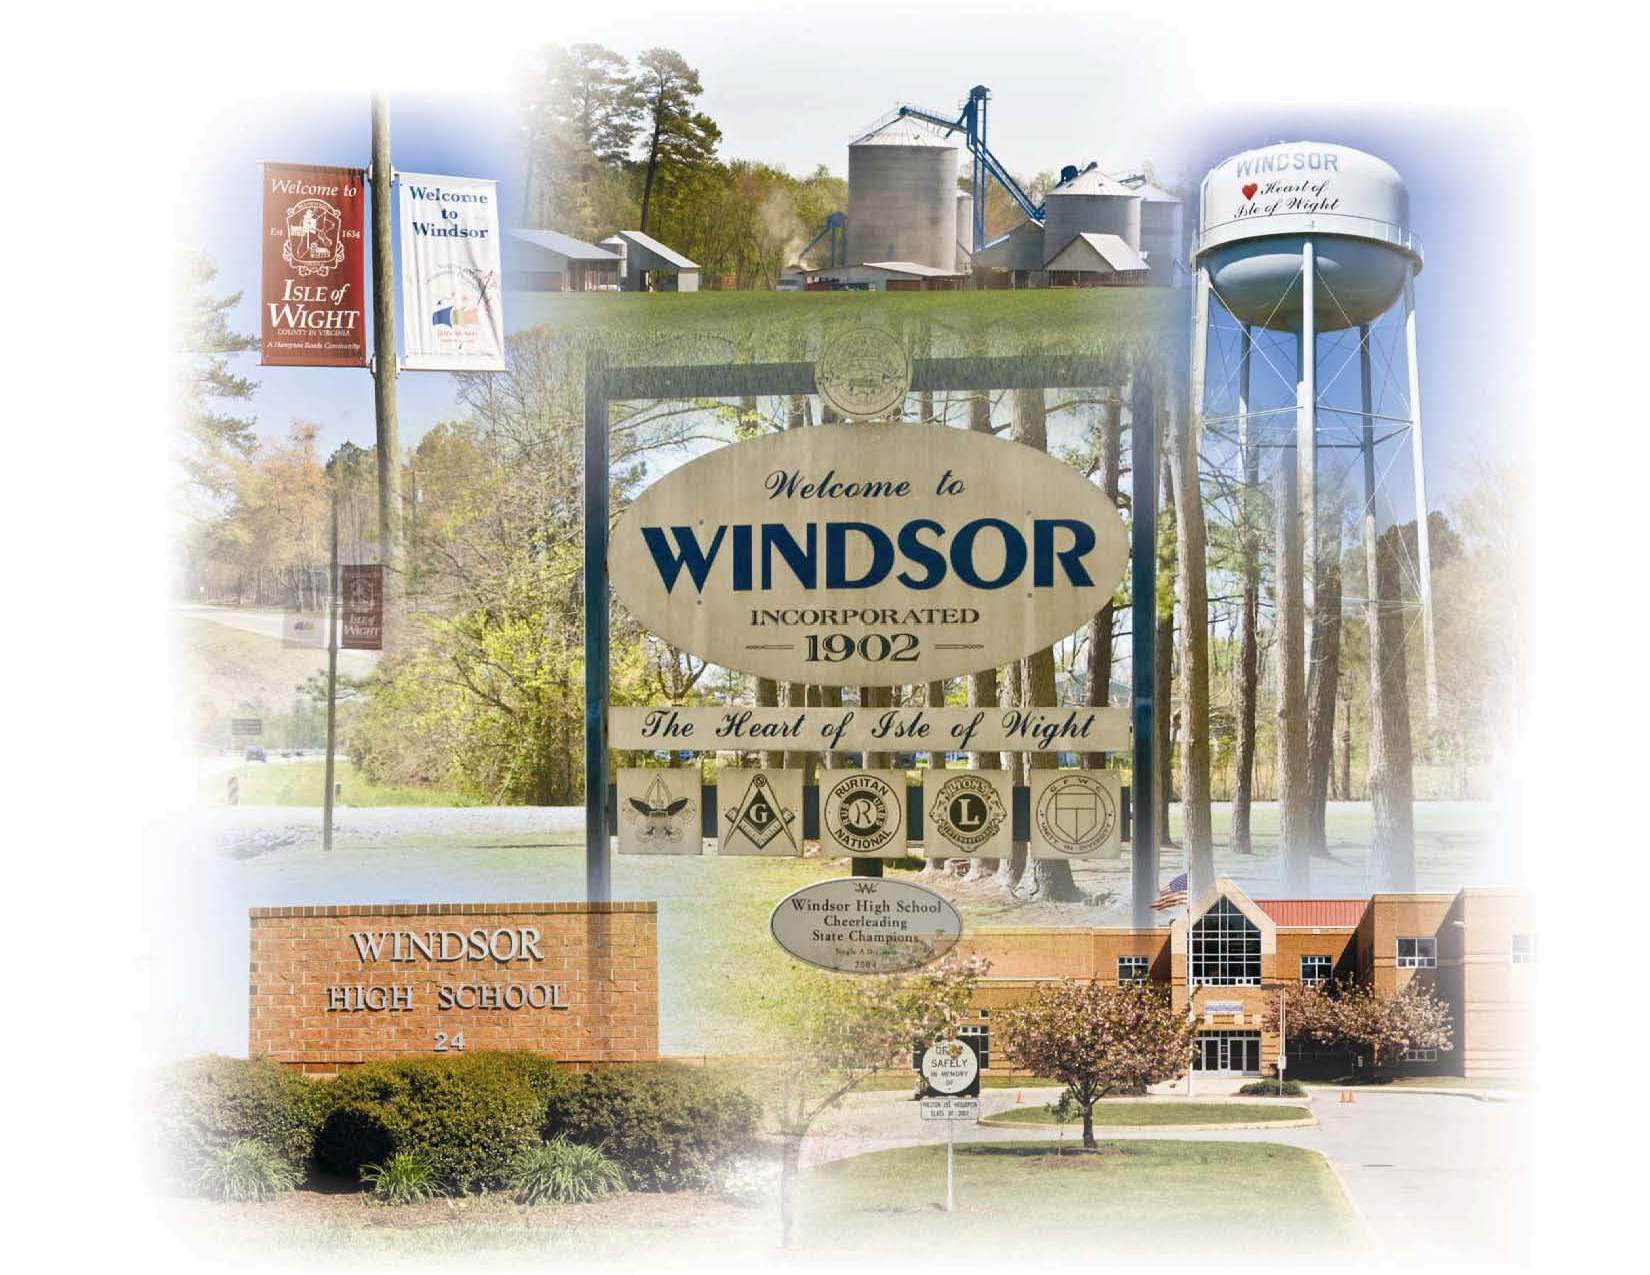 About Windsor